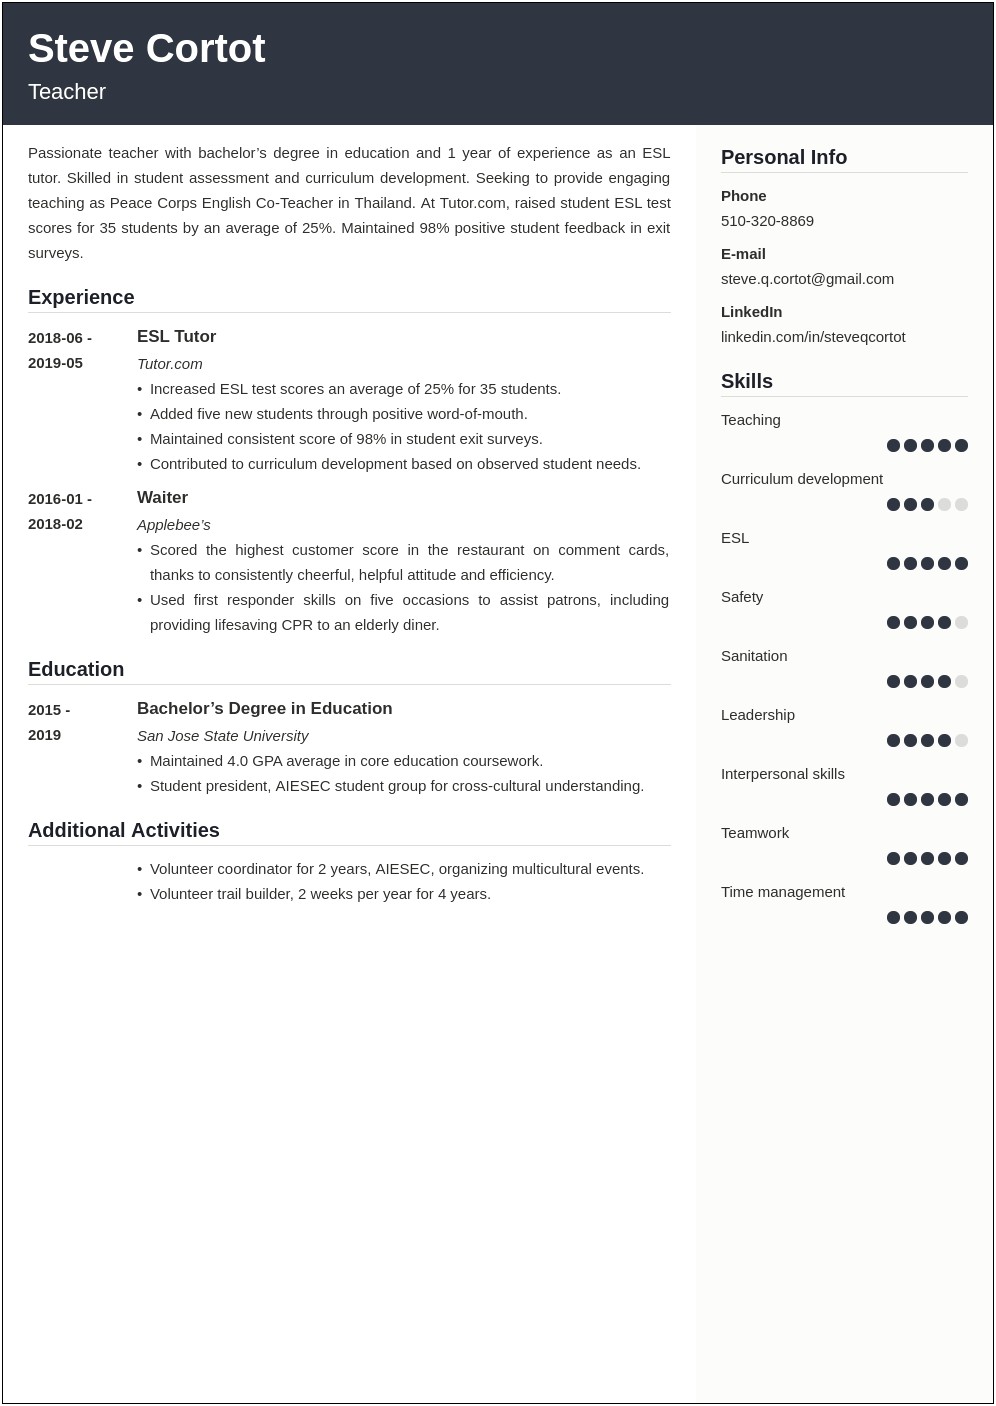 Peace Corps Education Resume Example